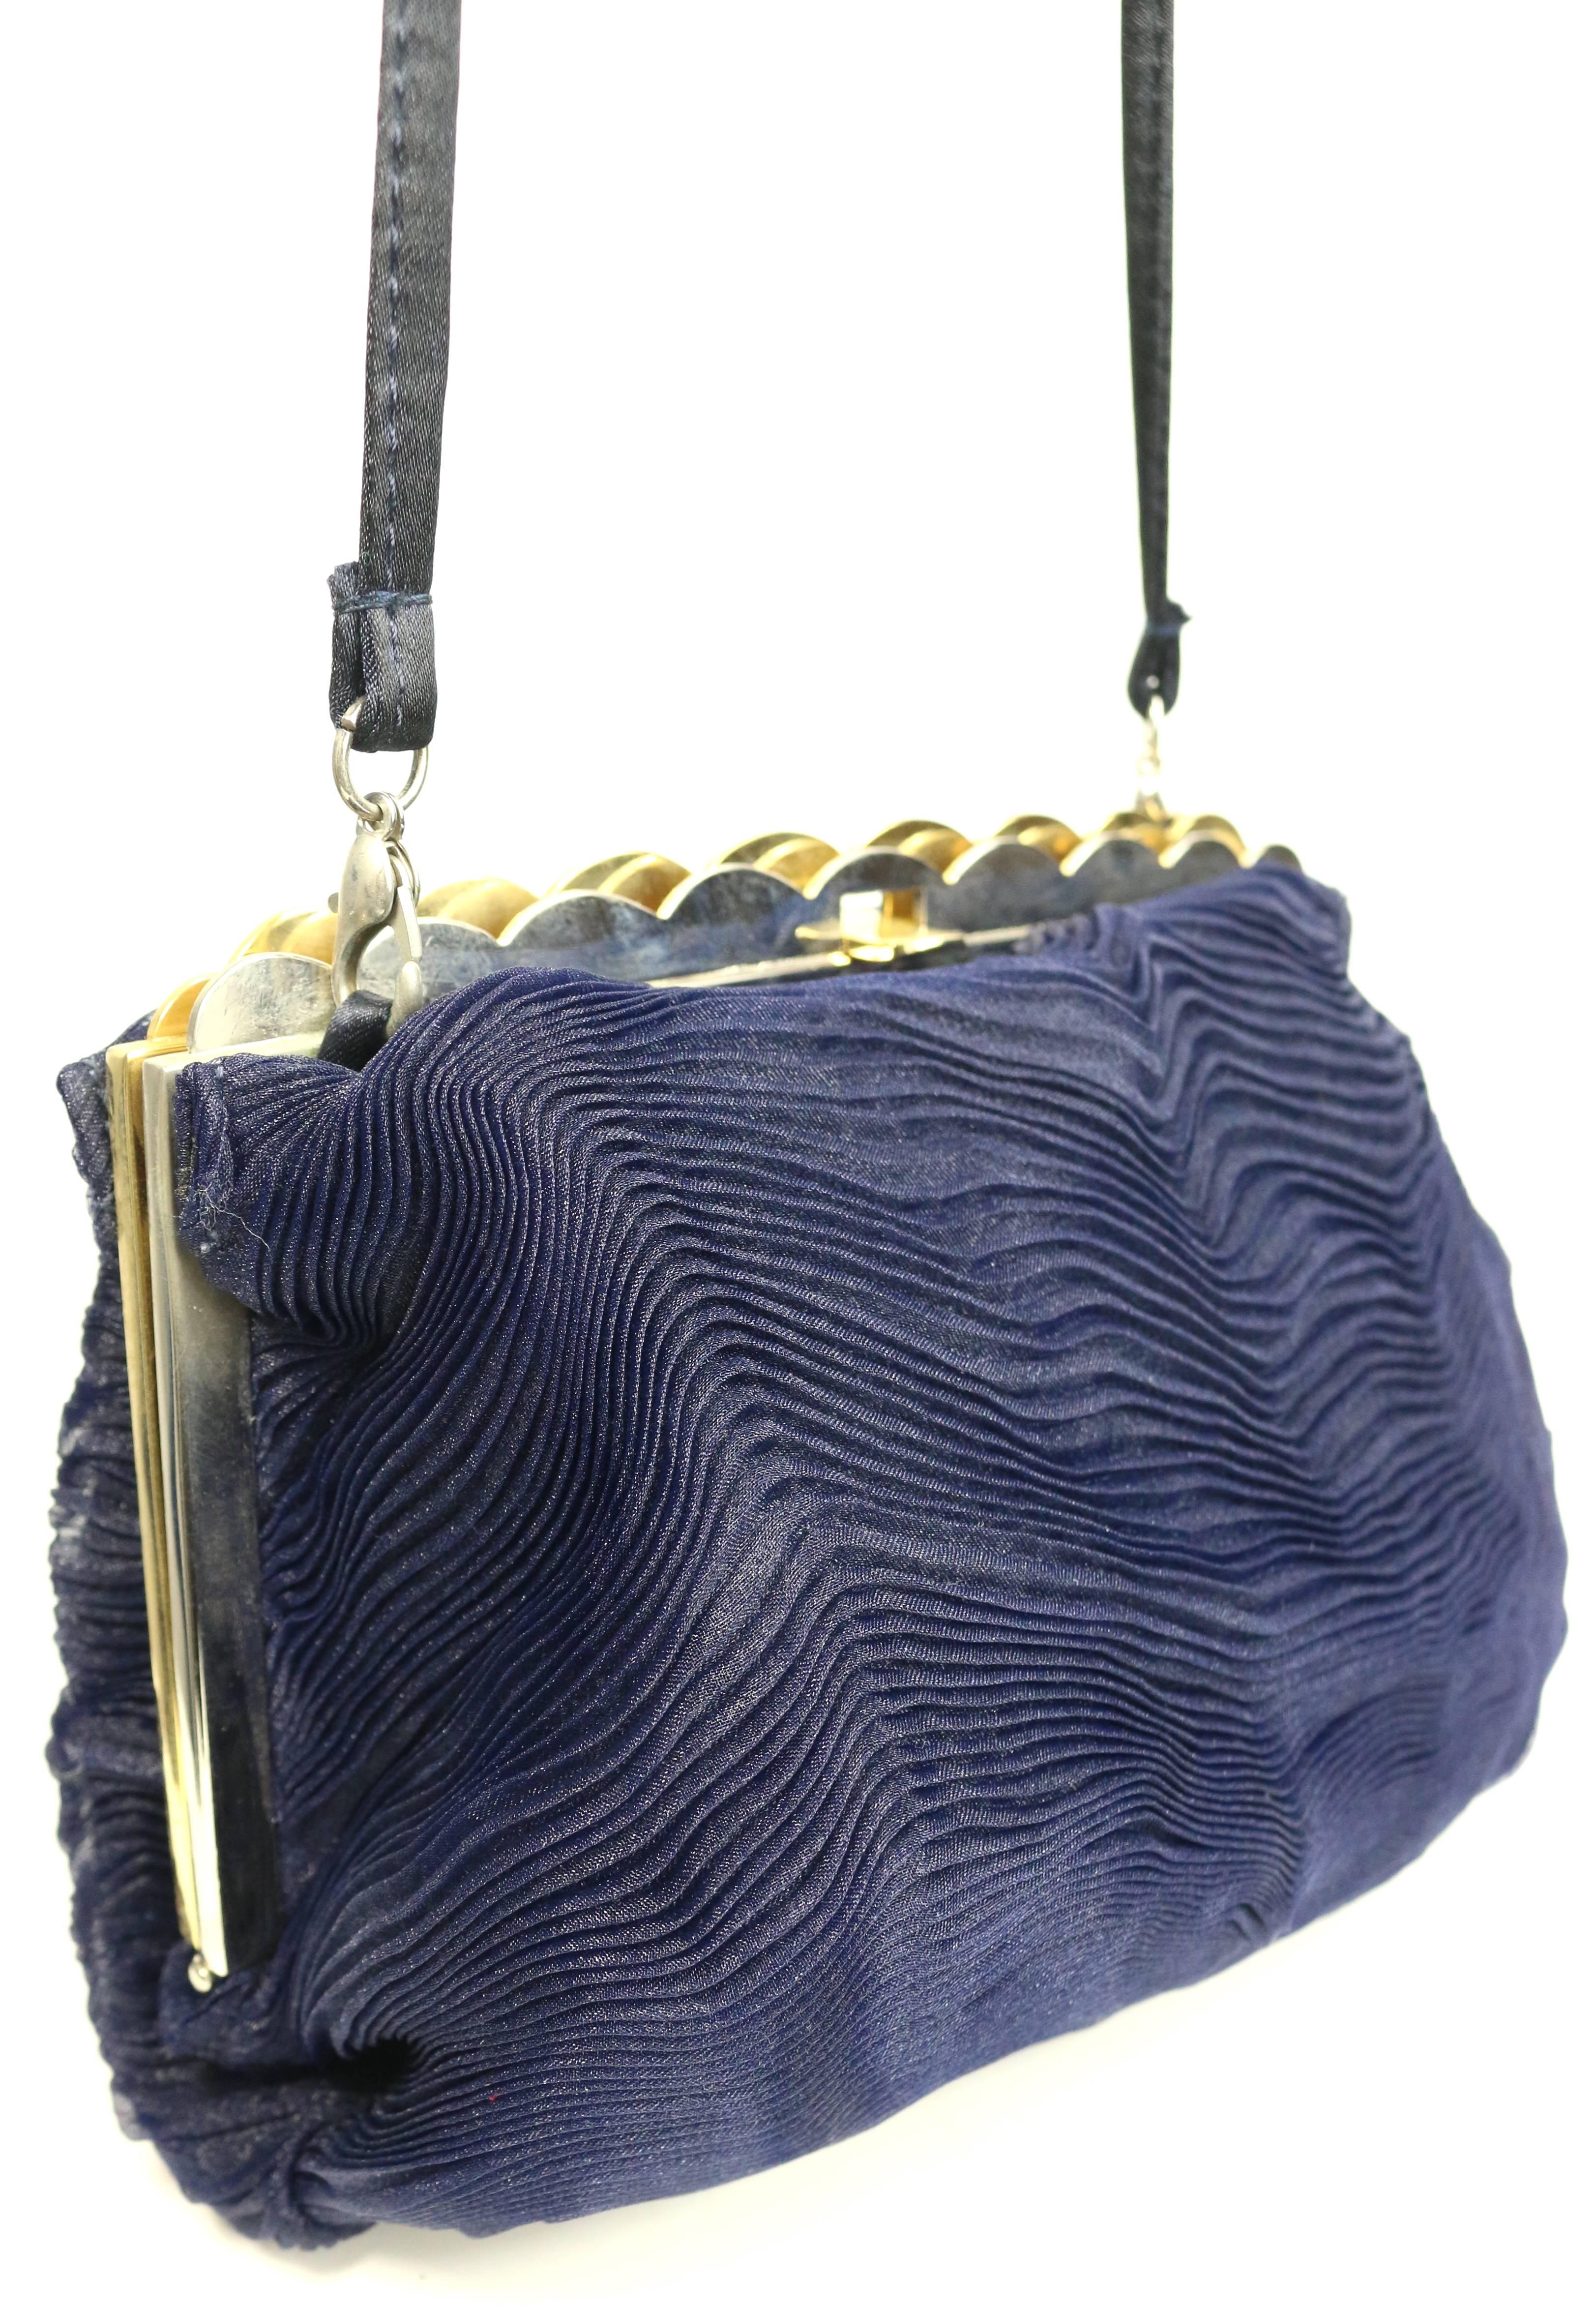 - Vintage 90s Desmo dark navy light weight pleated wave pattern clutch/ shoulder bag. 

- Featuring silver and gold toned hardware outline that support the bag. 

- Gold toned buckle closure. 

- Detachable silk shoulder strap. 

- Interior zip